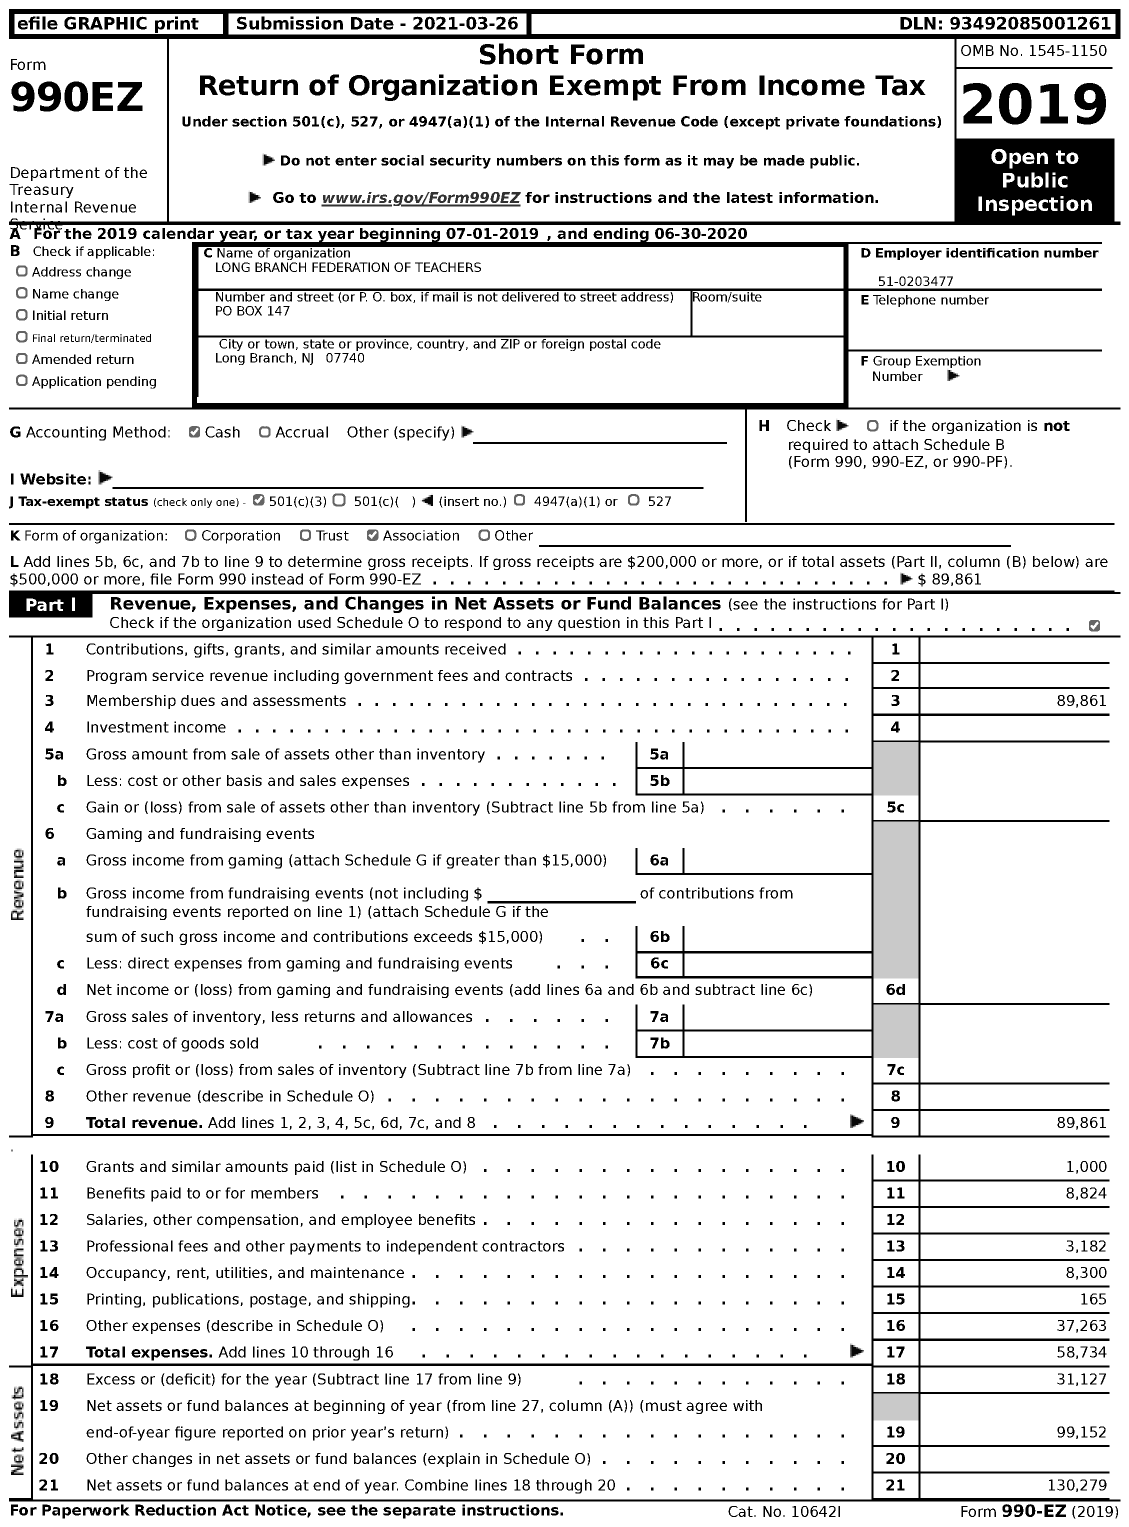 Image of first page of 2019 Form 990EZ for American Federation of Teachers - 3463 Long Branch Federation of Teac